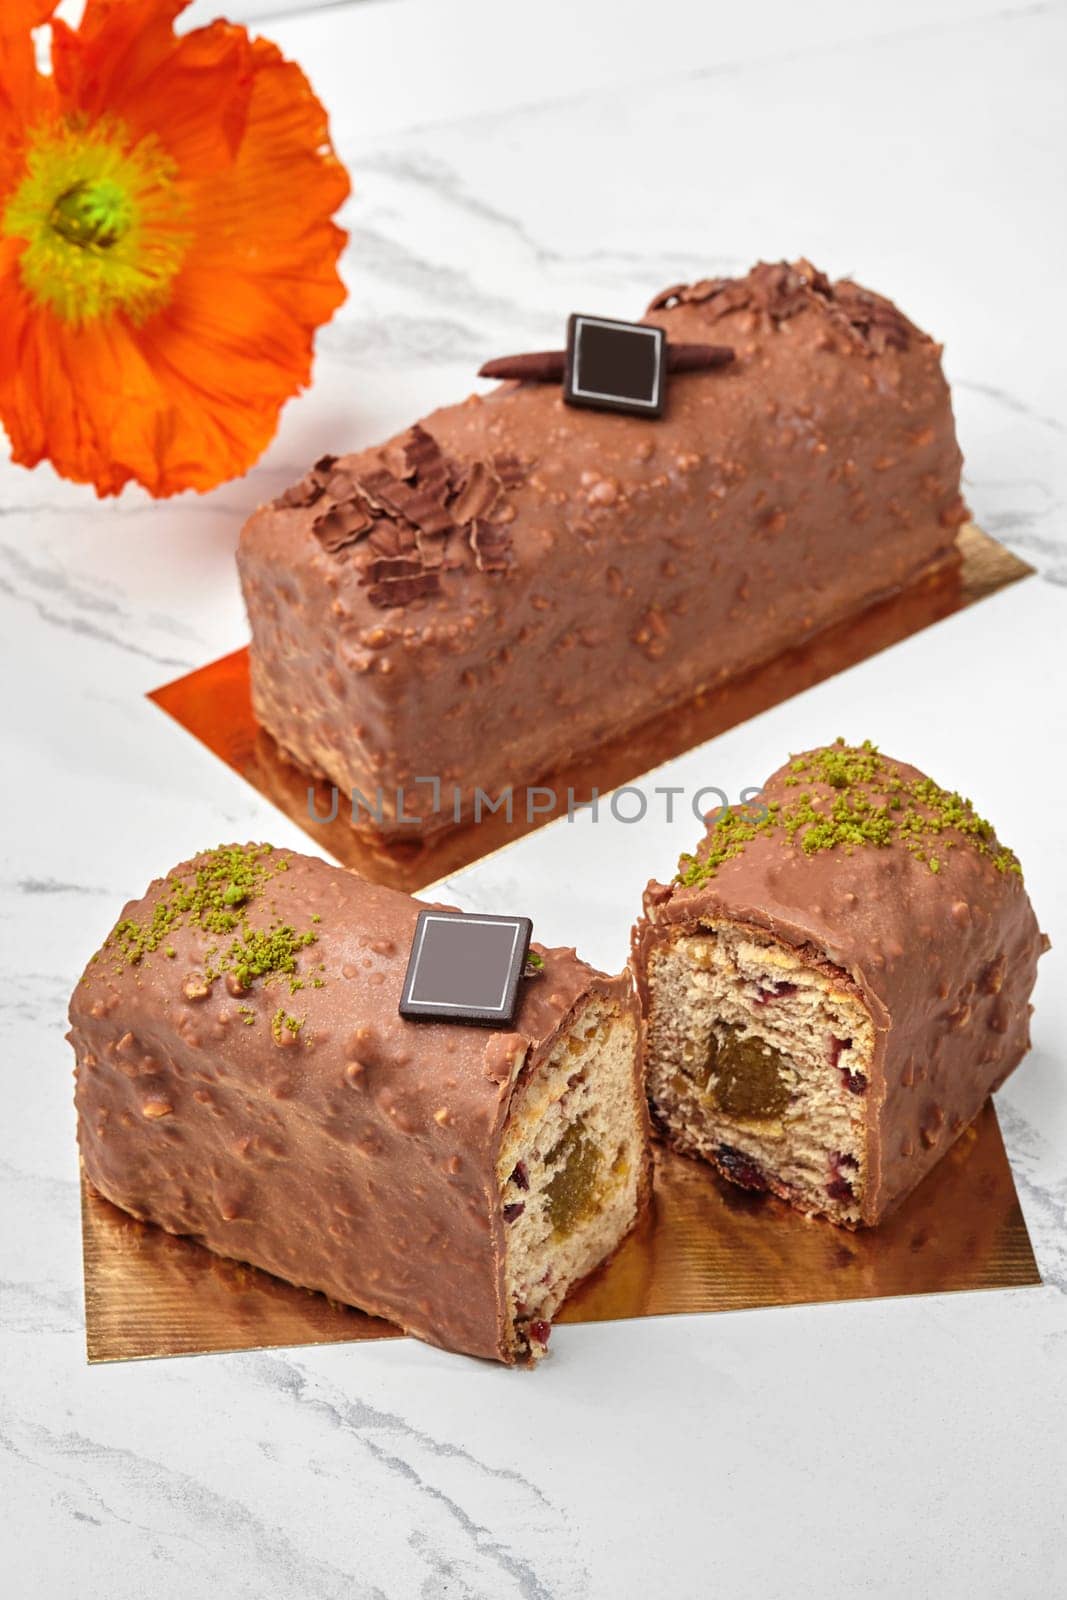 Chocolate glazed loaf cake with fruit filling, berries, nuts on marble with flower by nazarovsergey